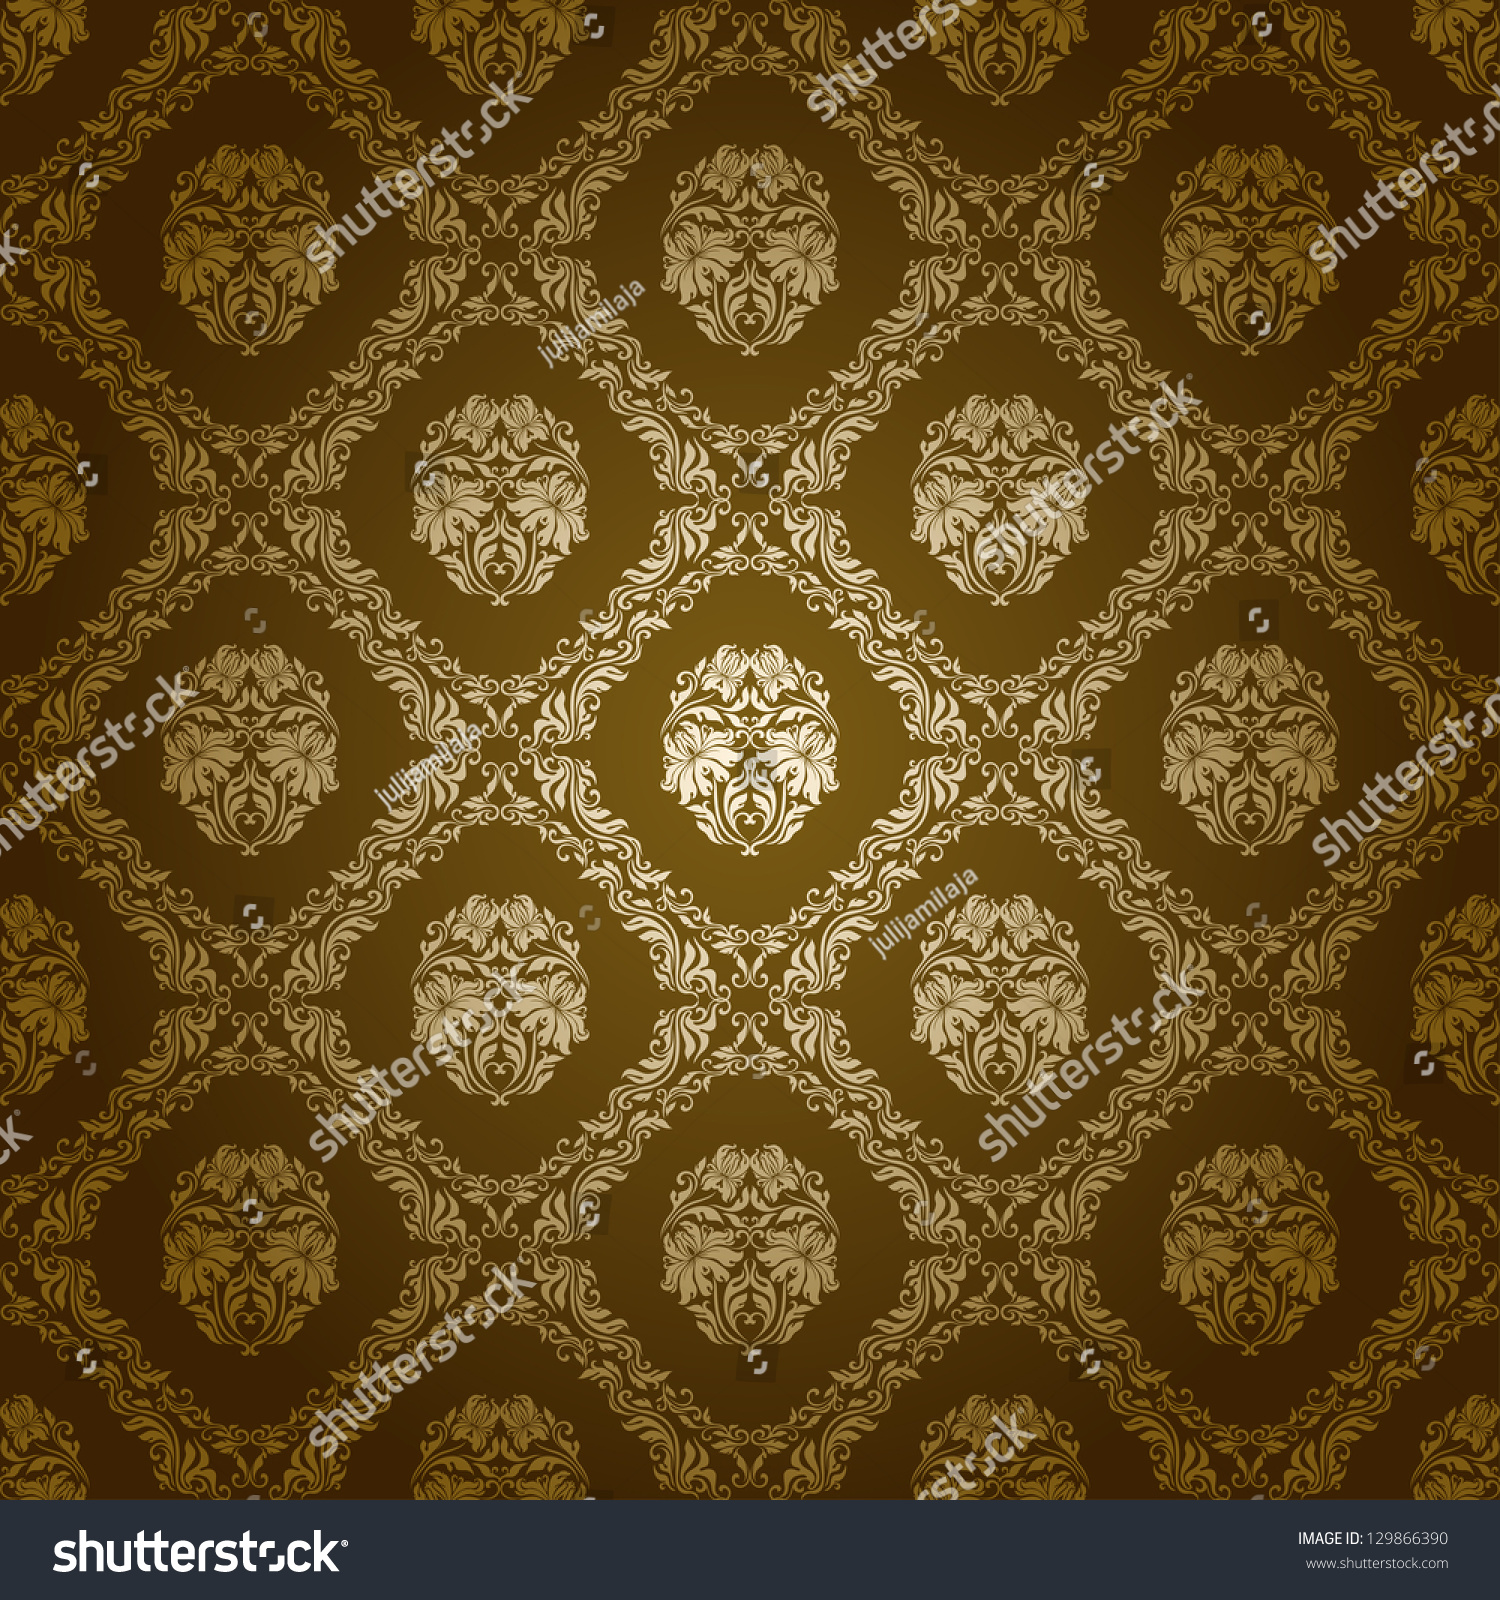 Damask Seamless Floral Pattern. Gold Flowers On Olive Background. Stock ...